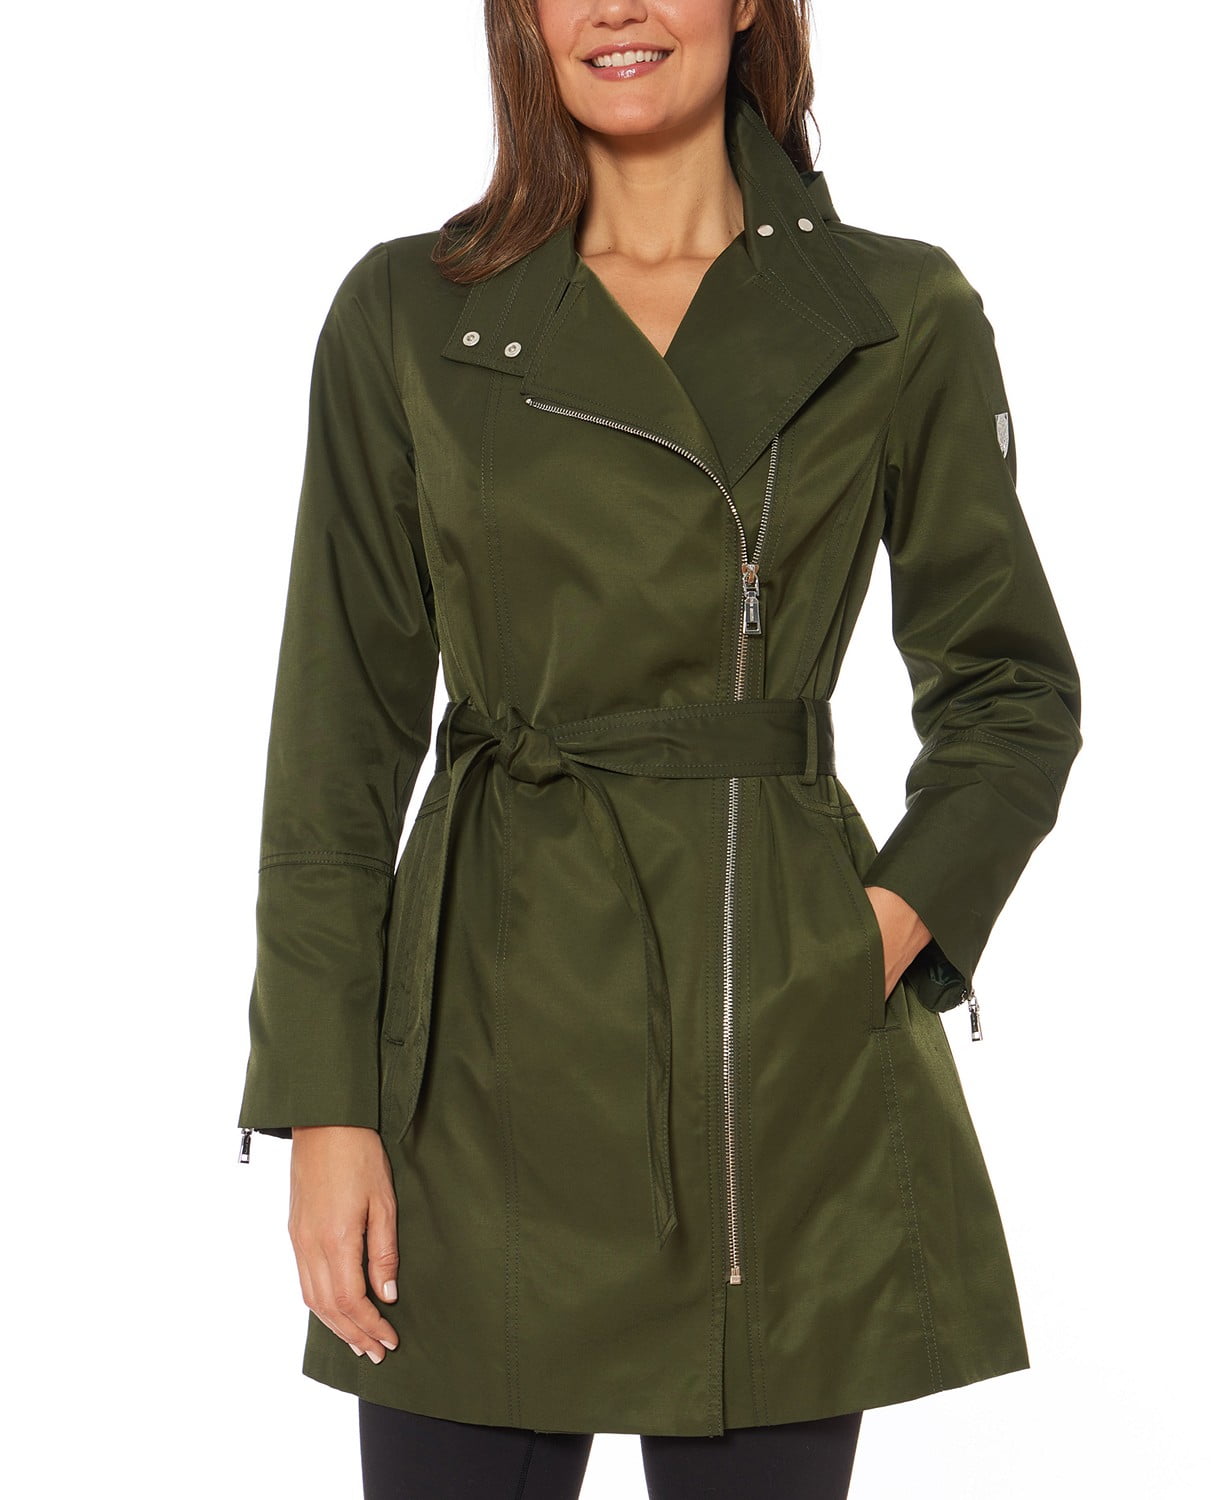 www.couturepoint.com-vince-camuto-womens-green-hooded-water-resistant-belted-raincoat